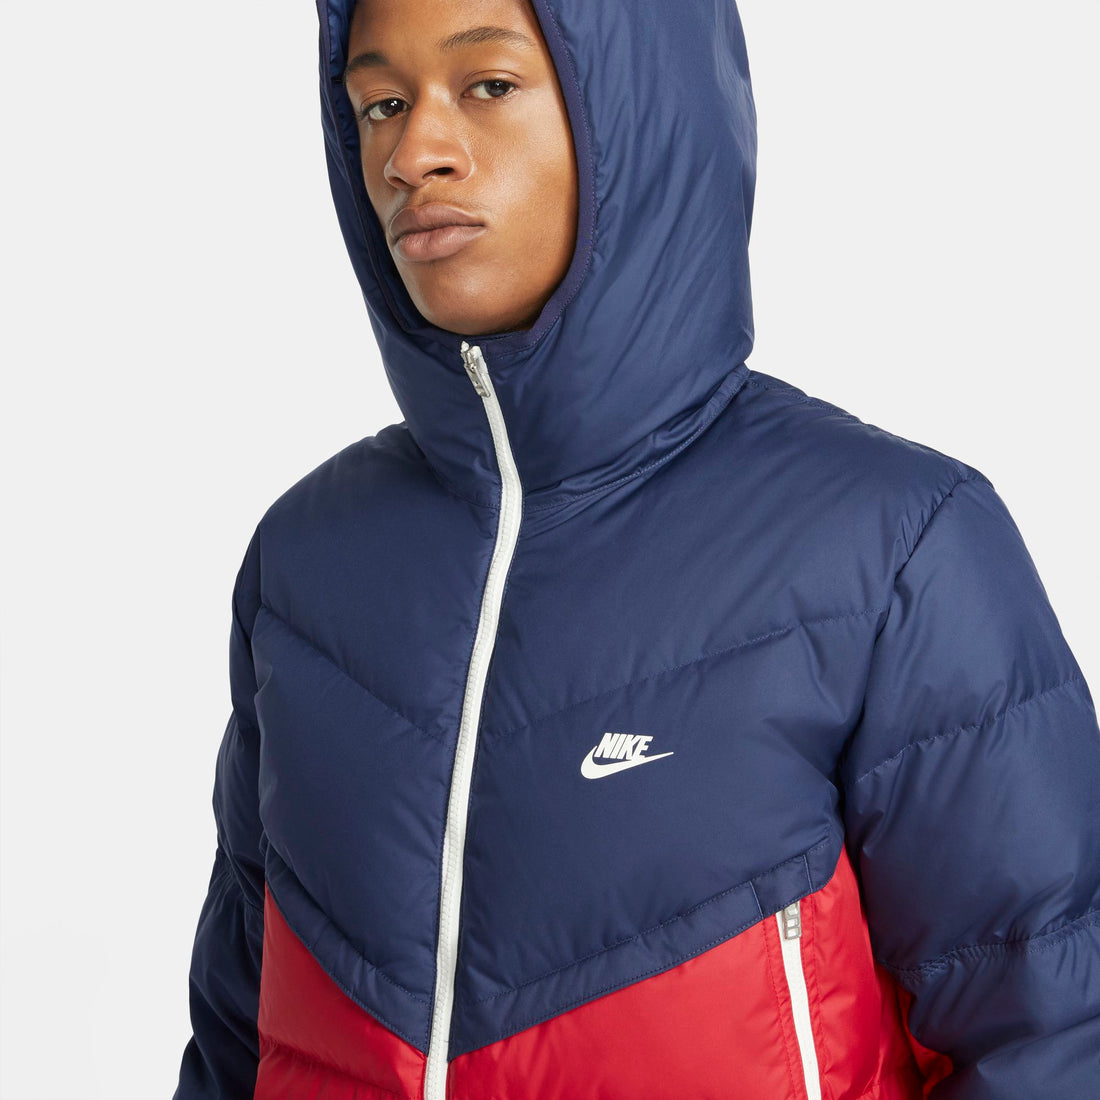 Nike Sportswear Storm-FIT Windrunner (Midnight Navy/Gym Red/Sail